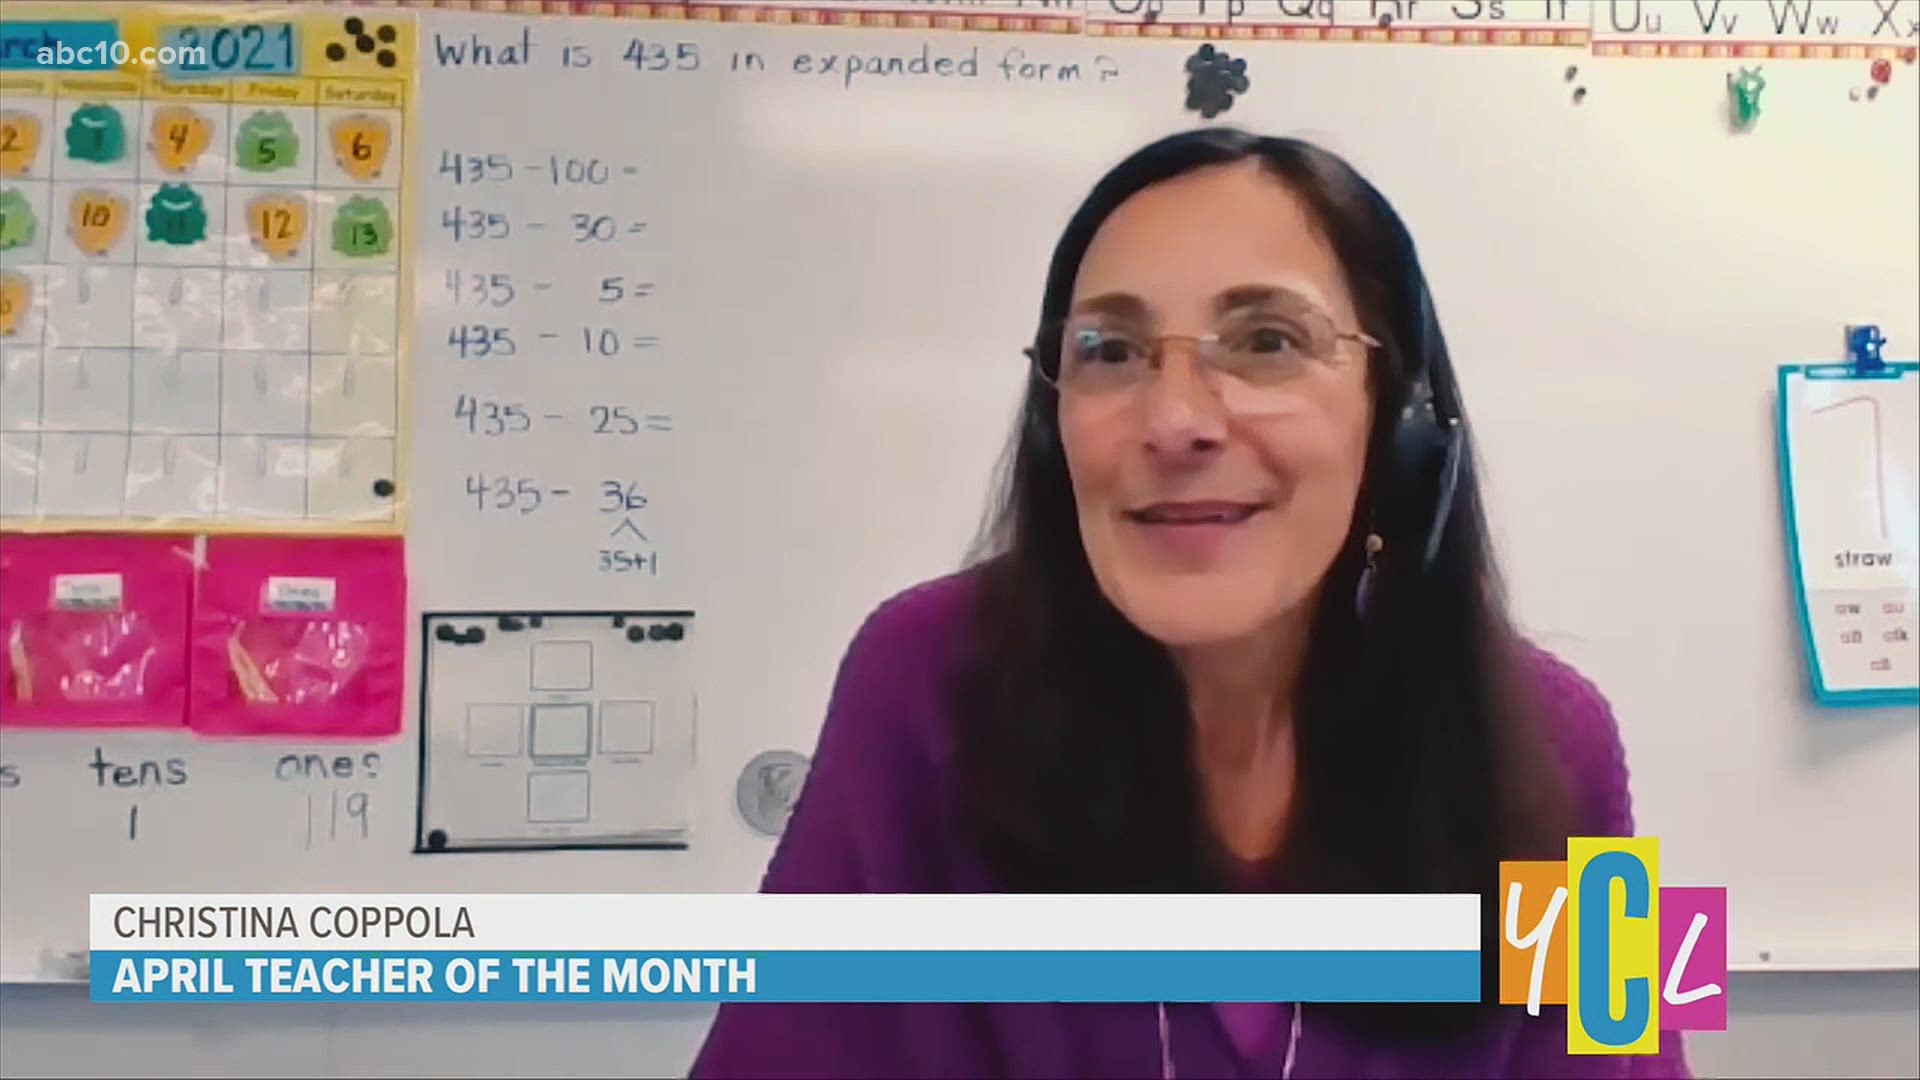 Christina Coppola is a veteran teacher with more than 20 years to her credit, and this past year she's found new ways to connect with her students.